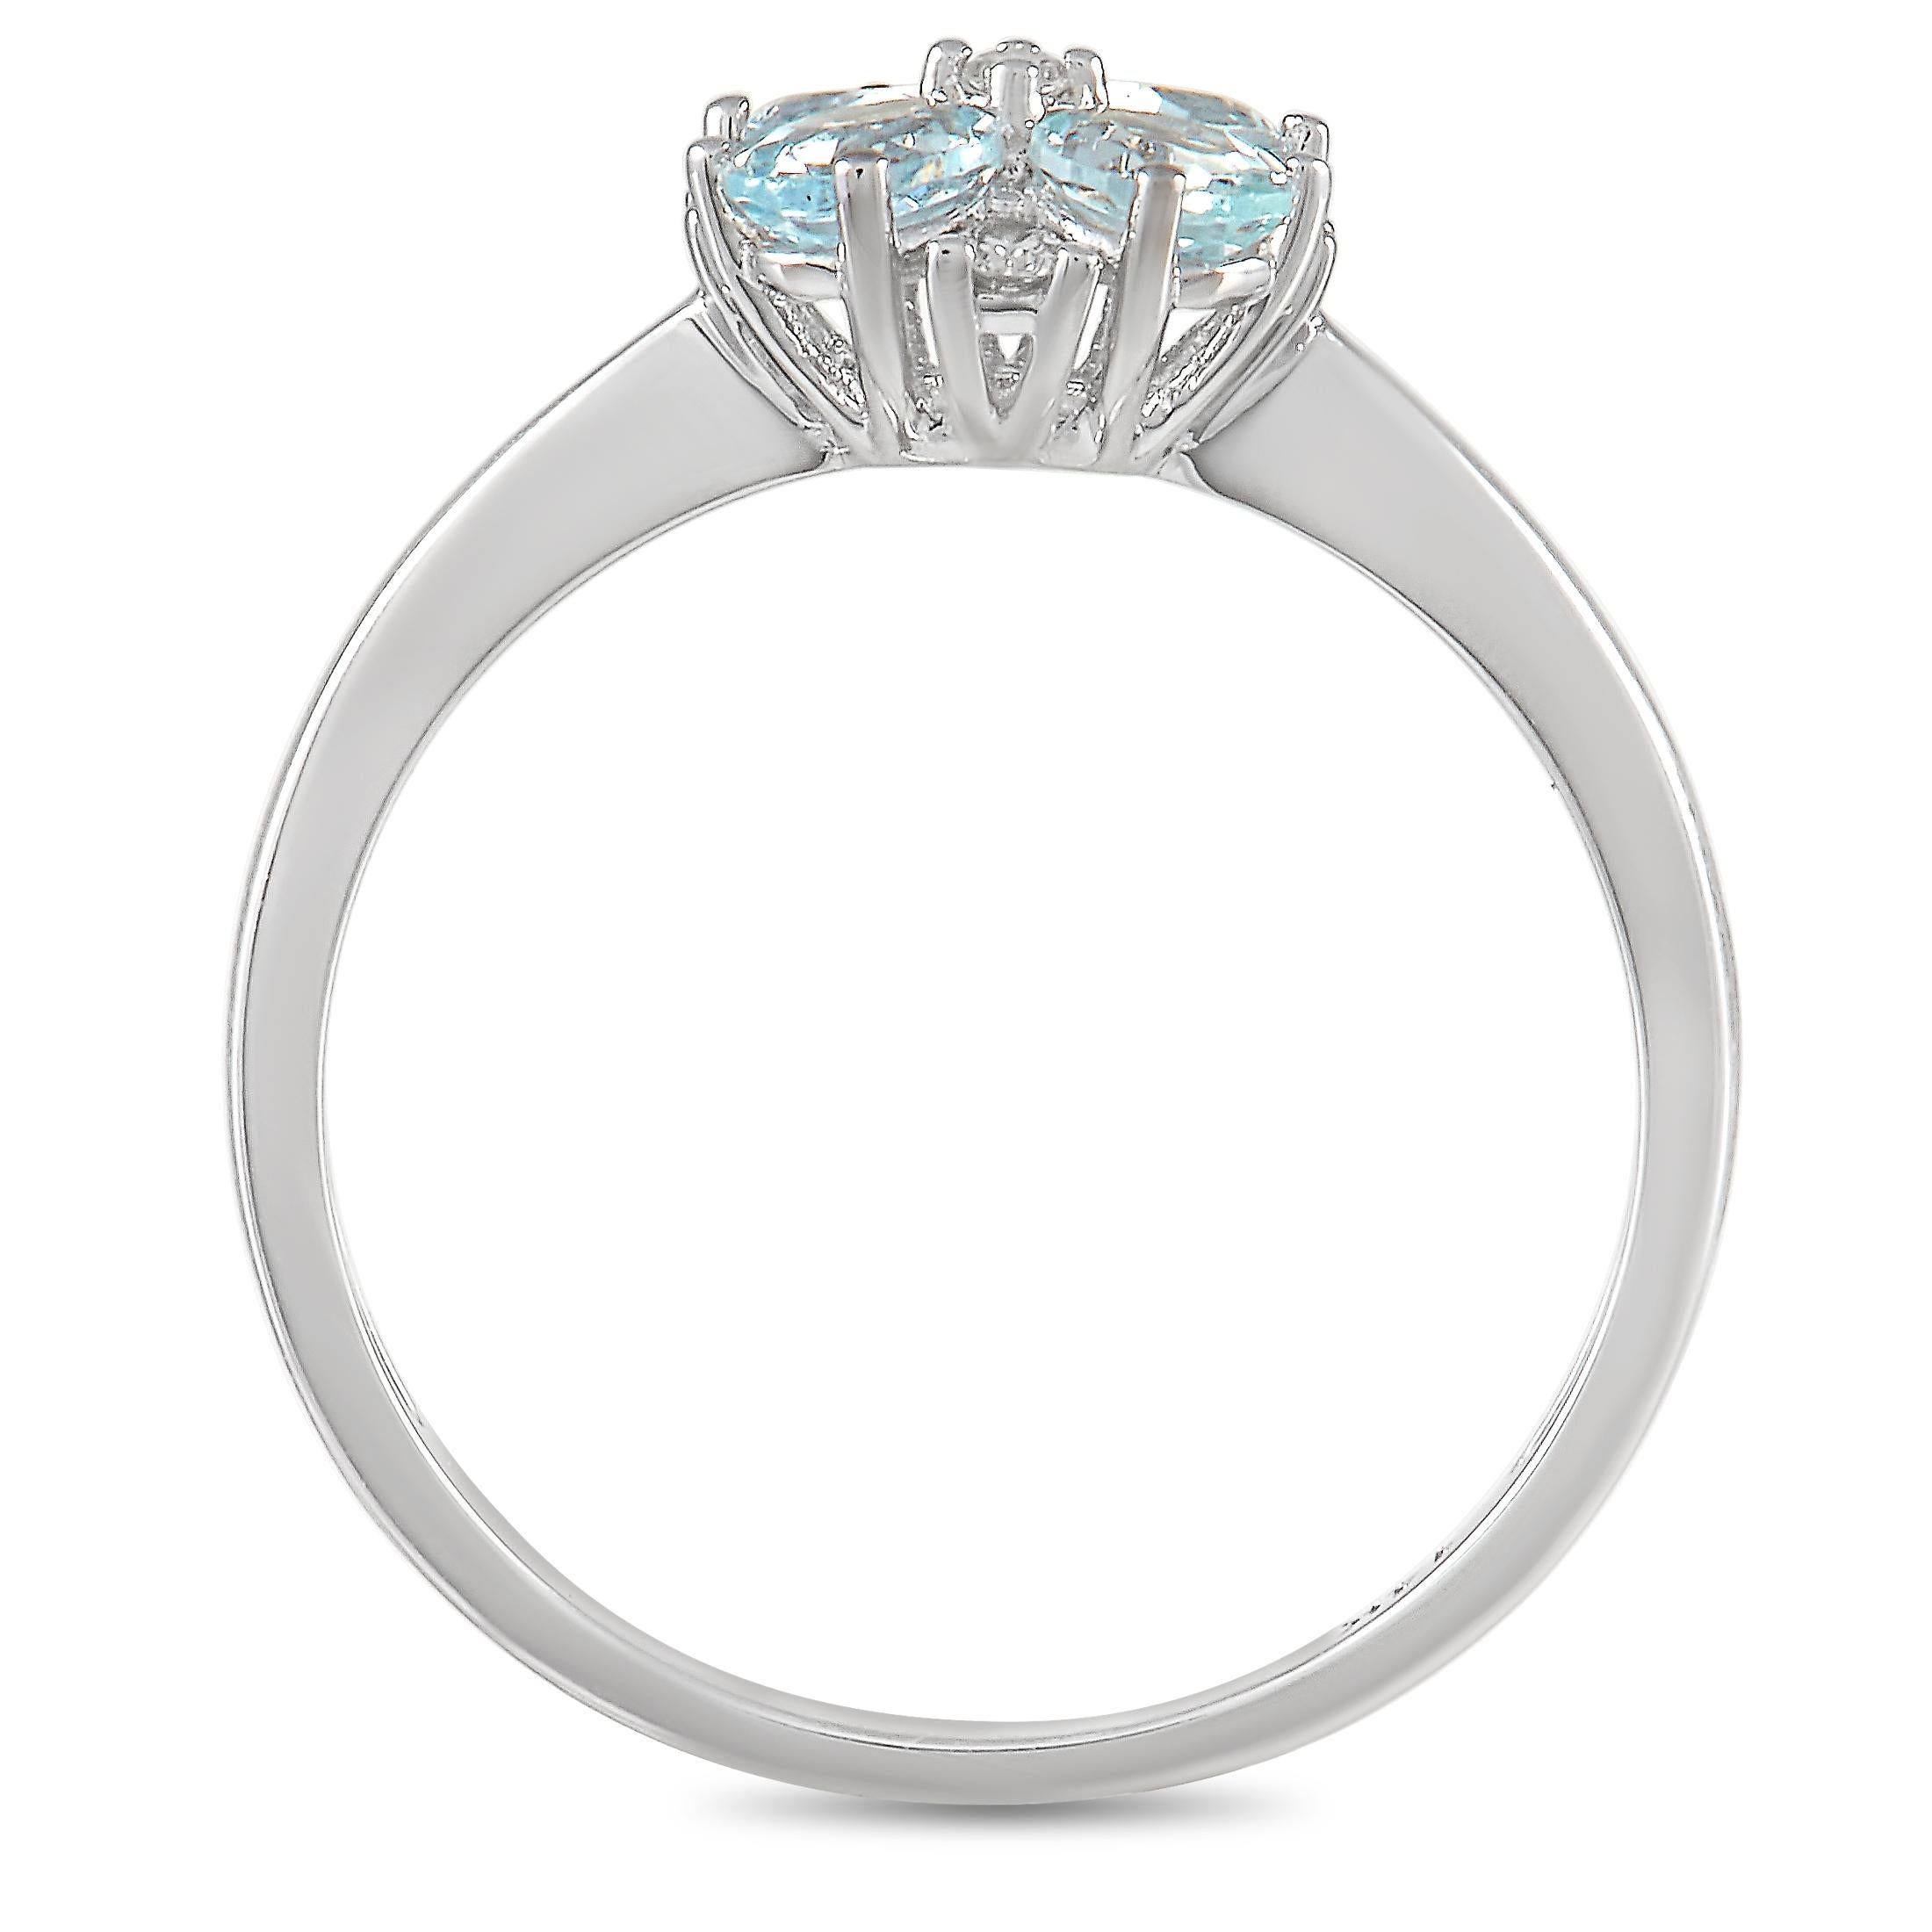 At the center of this exquisite ring, four light blue Aquamarine gemstones serve as a fabulous focal point. Diamond accents with a total weight of 0.08 carats add even more elegance to this minimalist design. The 14K White Gold setting features a